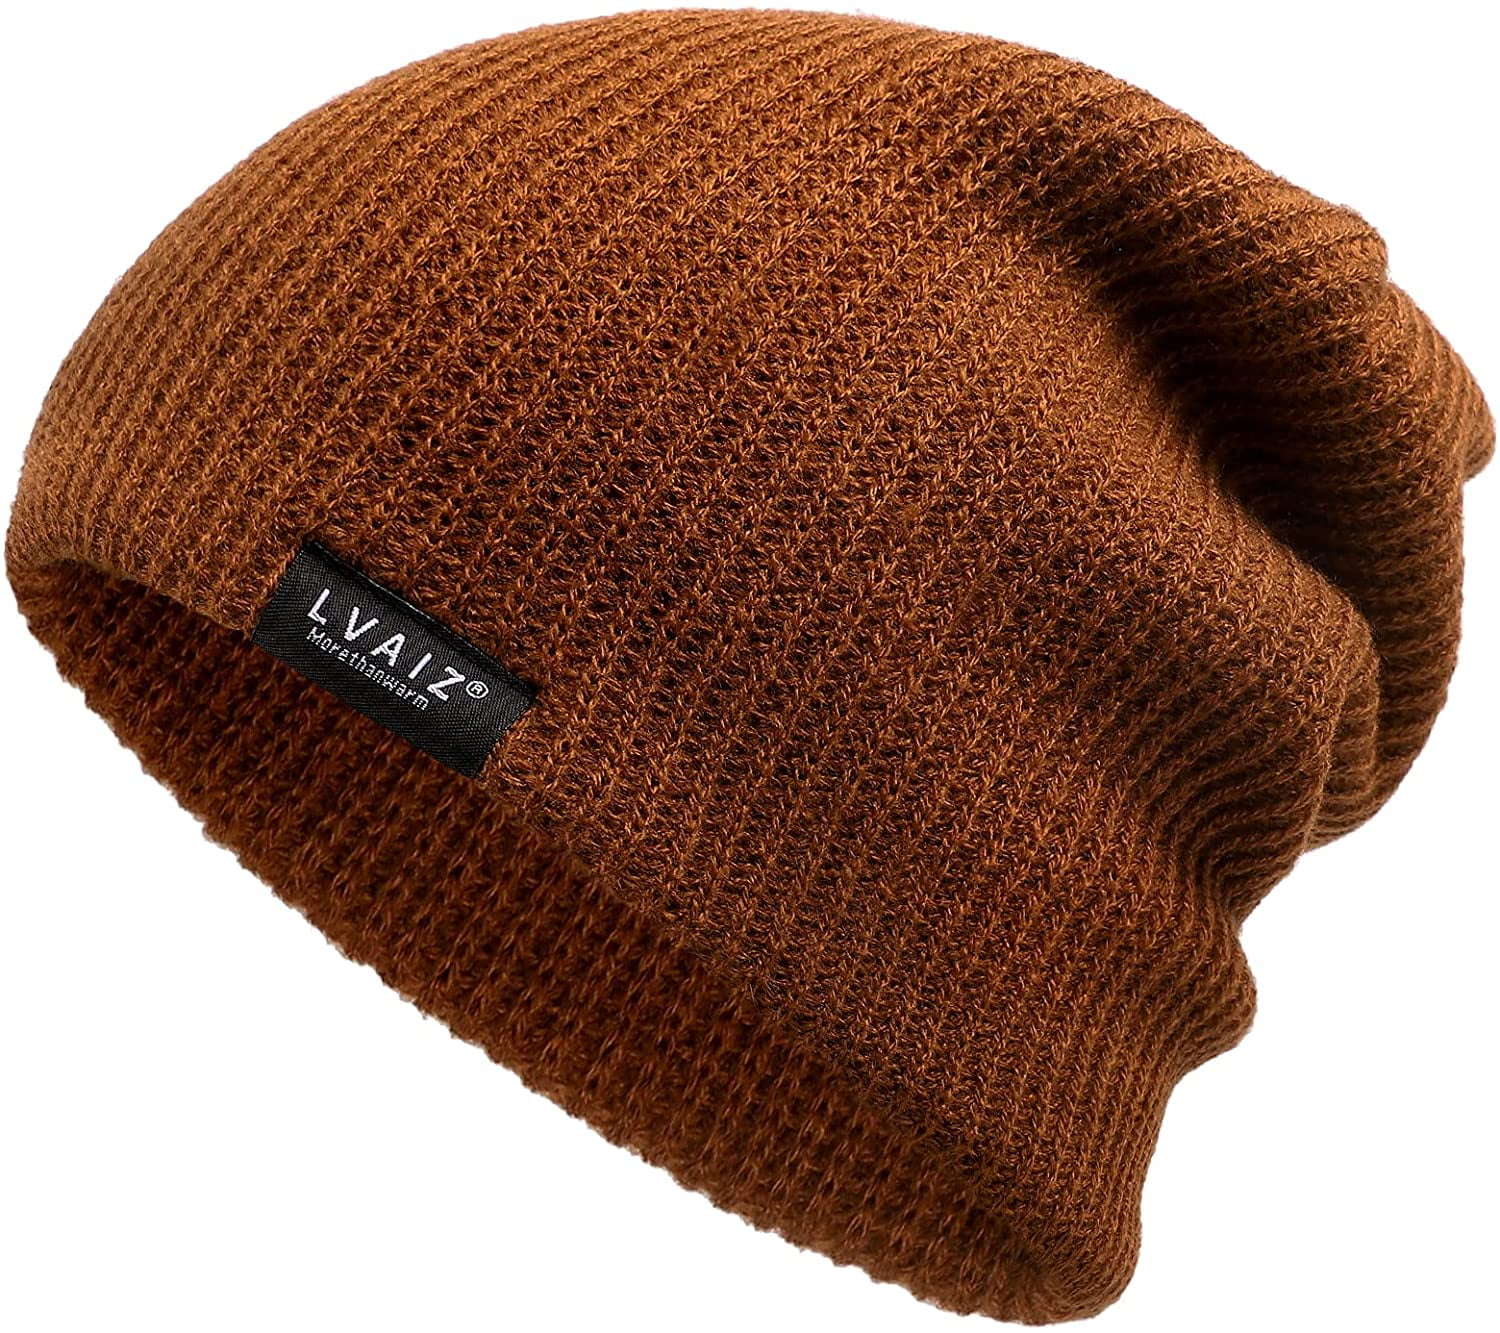 Lvaiz Winter Knitted Beanie Hats for Women Stretchy Soft Thin Cap Mens Slouchy Warm Cable Hat